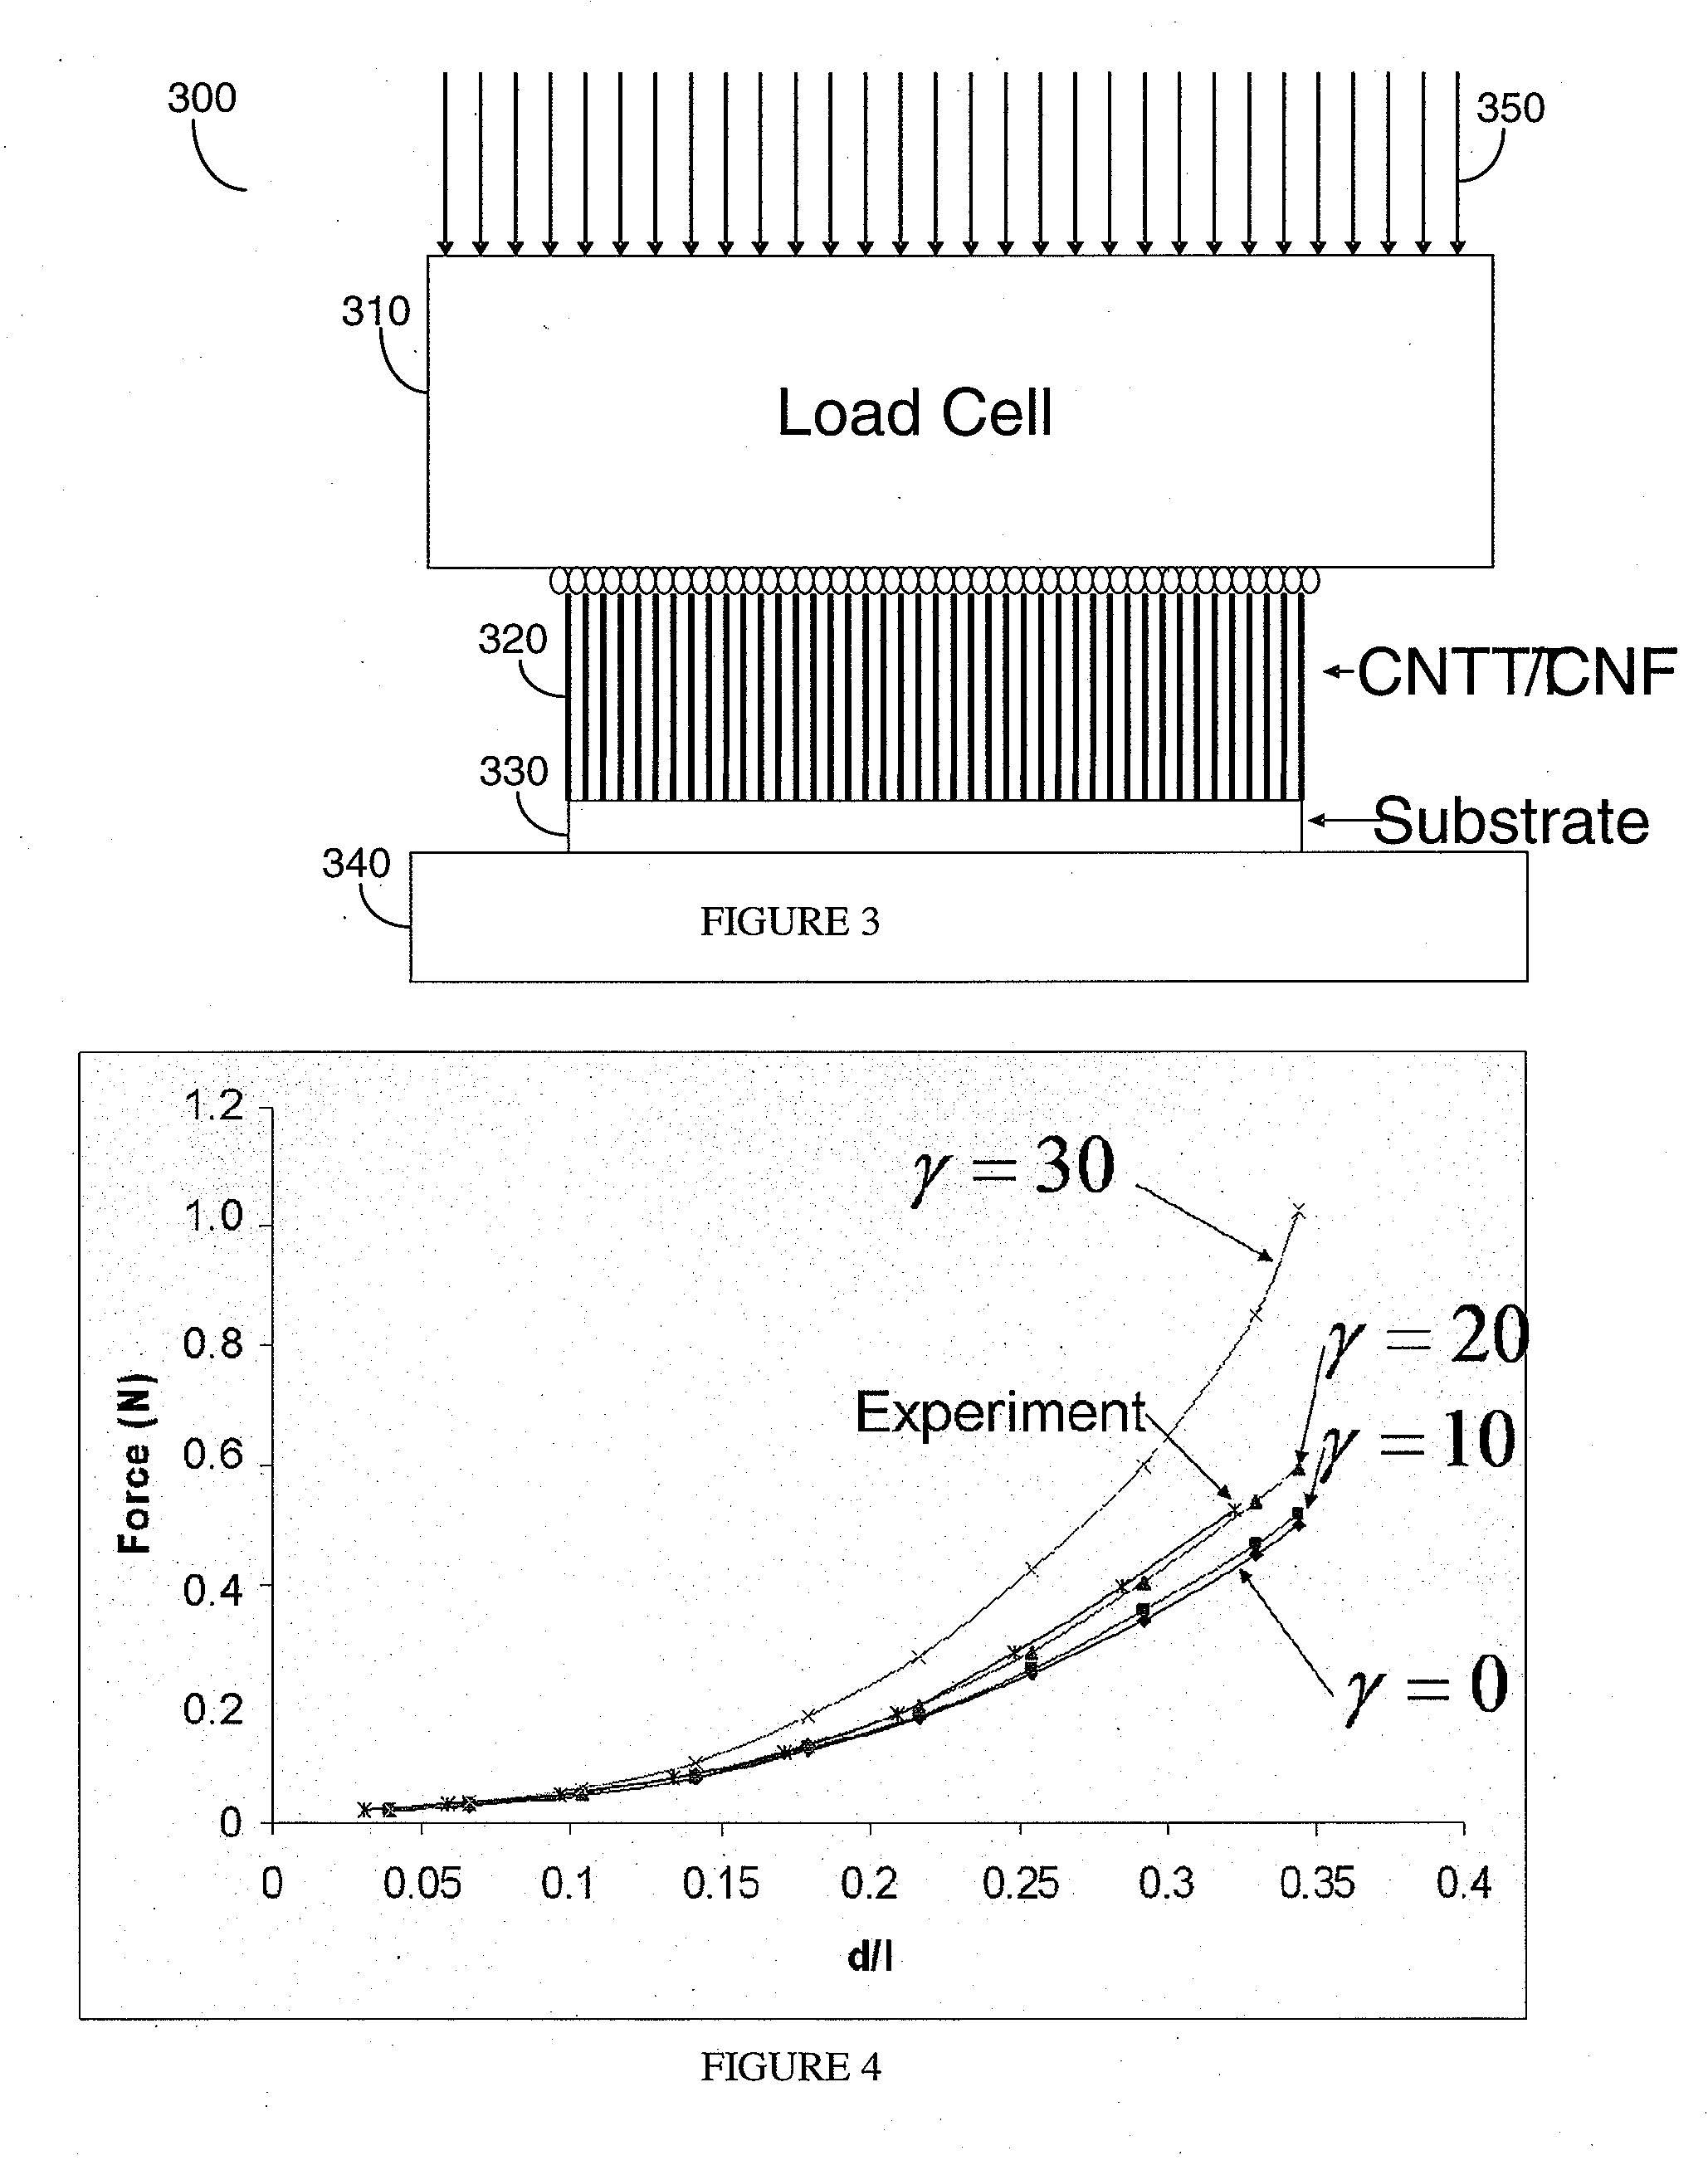 Method and Apparatus for Evaluation and Improvement of Mechanical and Thermal Properties of CNT/CNF Arrays